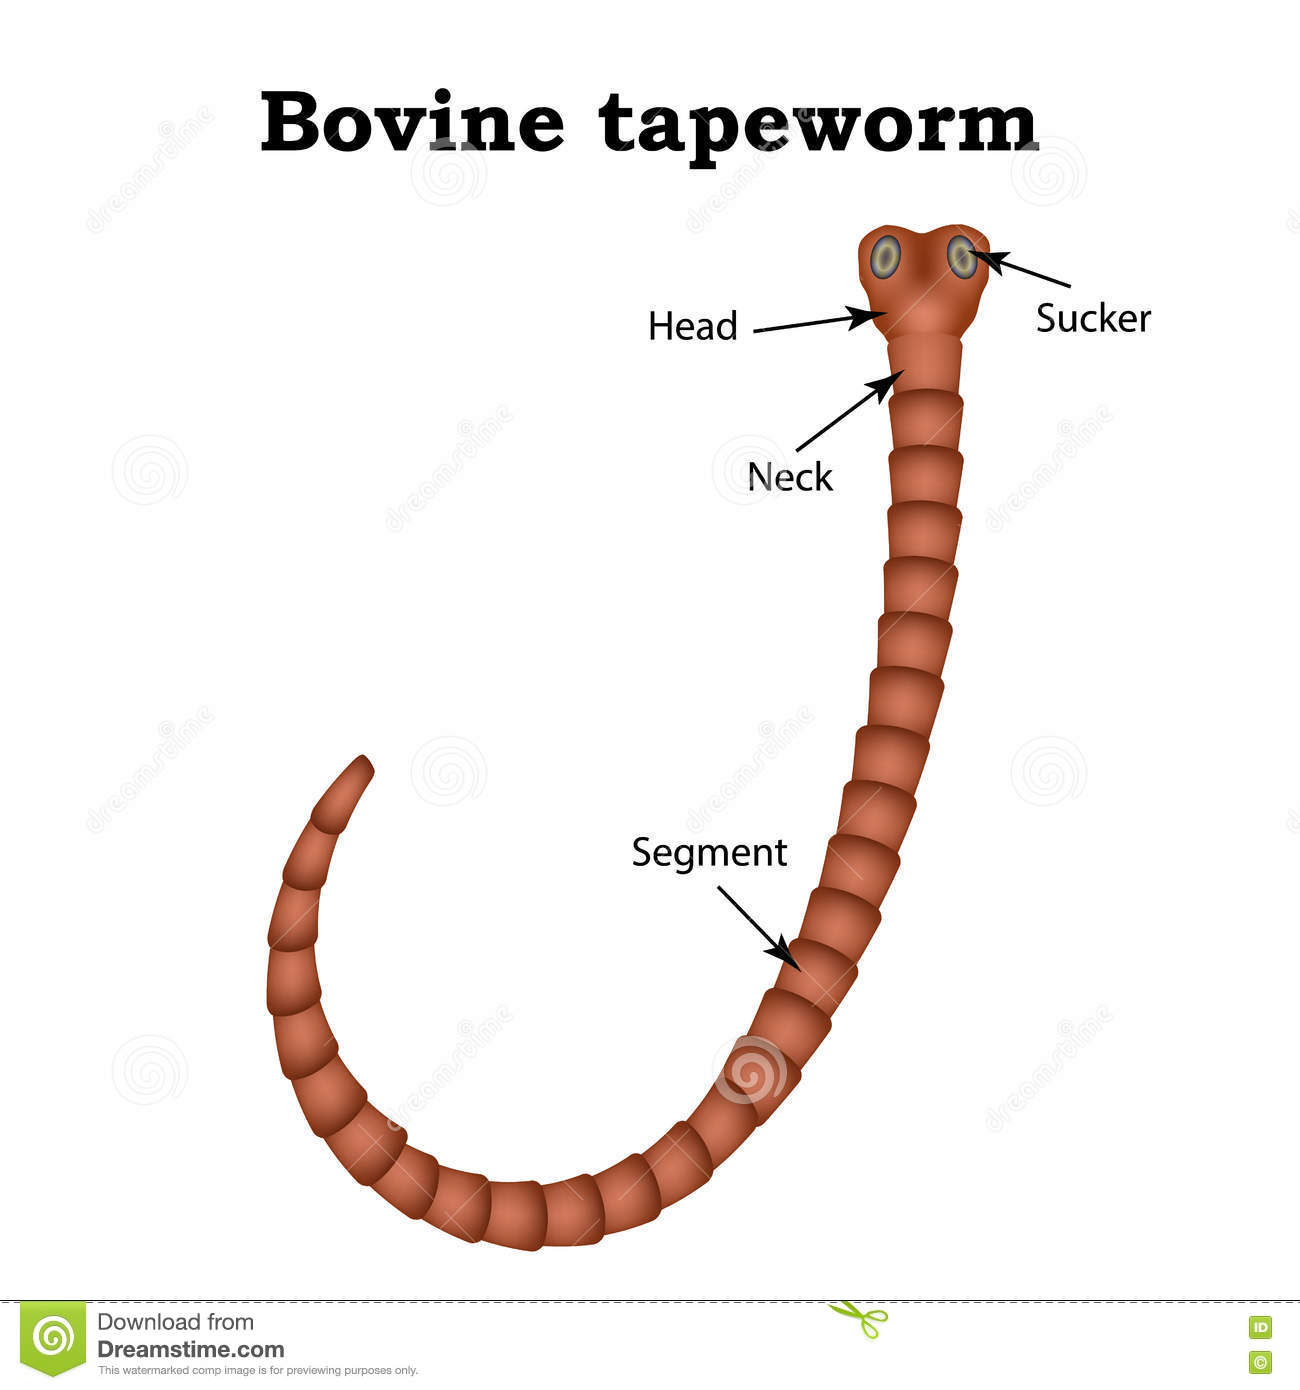 Top How To Draw A Tapeworm of all time The ultimate guide 